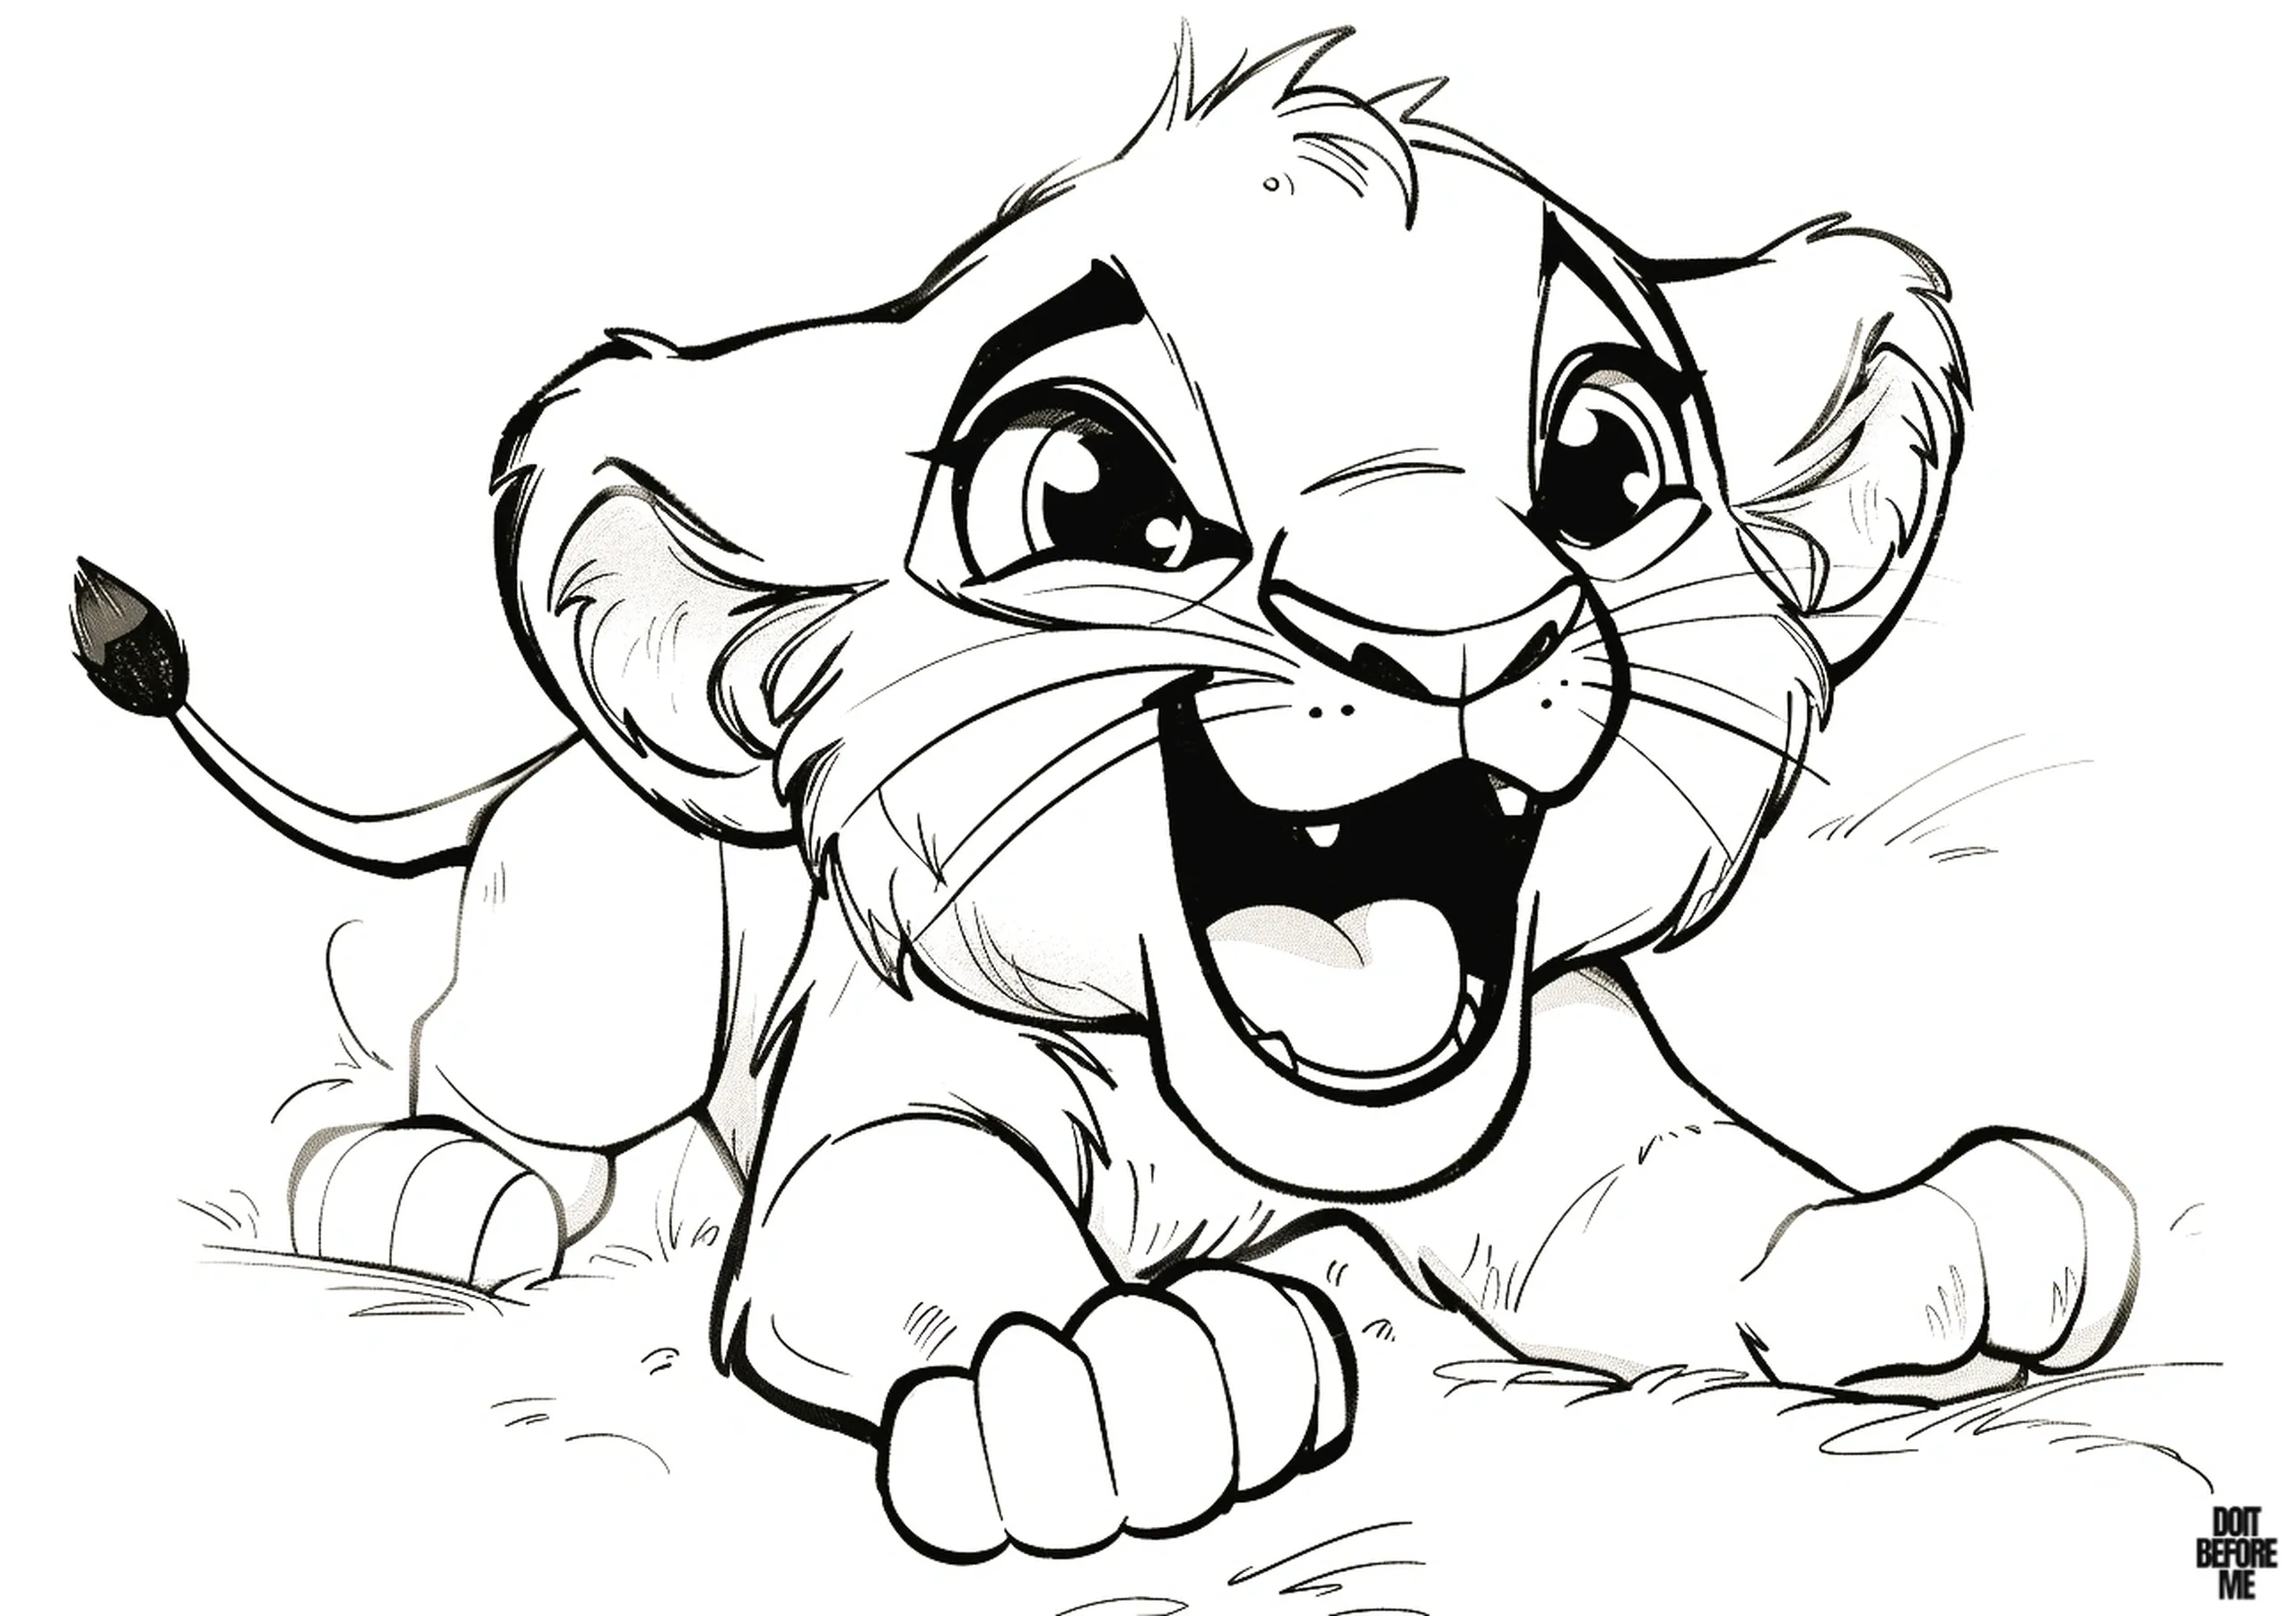 Printable coloring page featuring a playful lioness cub poised for a pounce is ideal for kids' coloring due to its cute and lively behavior.